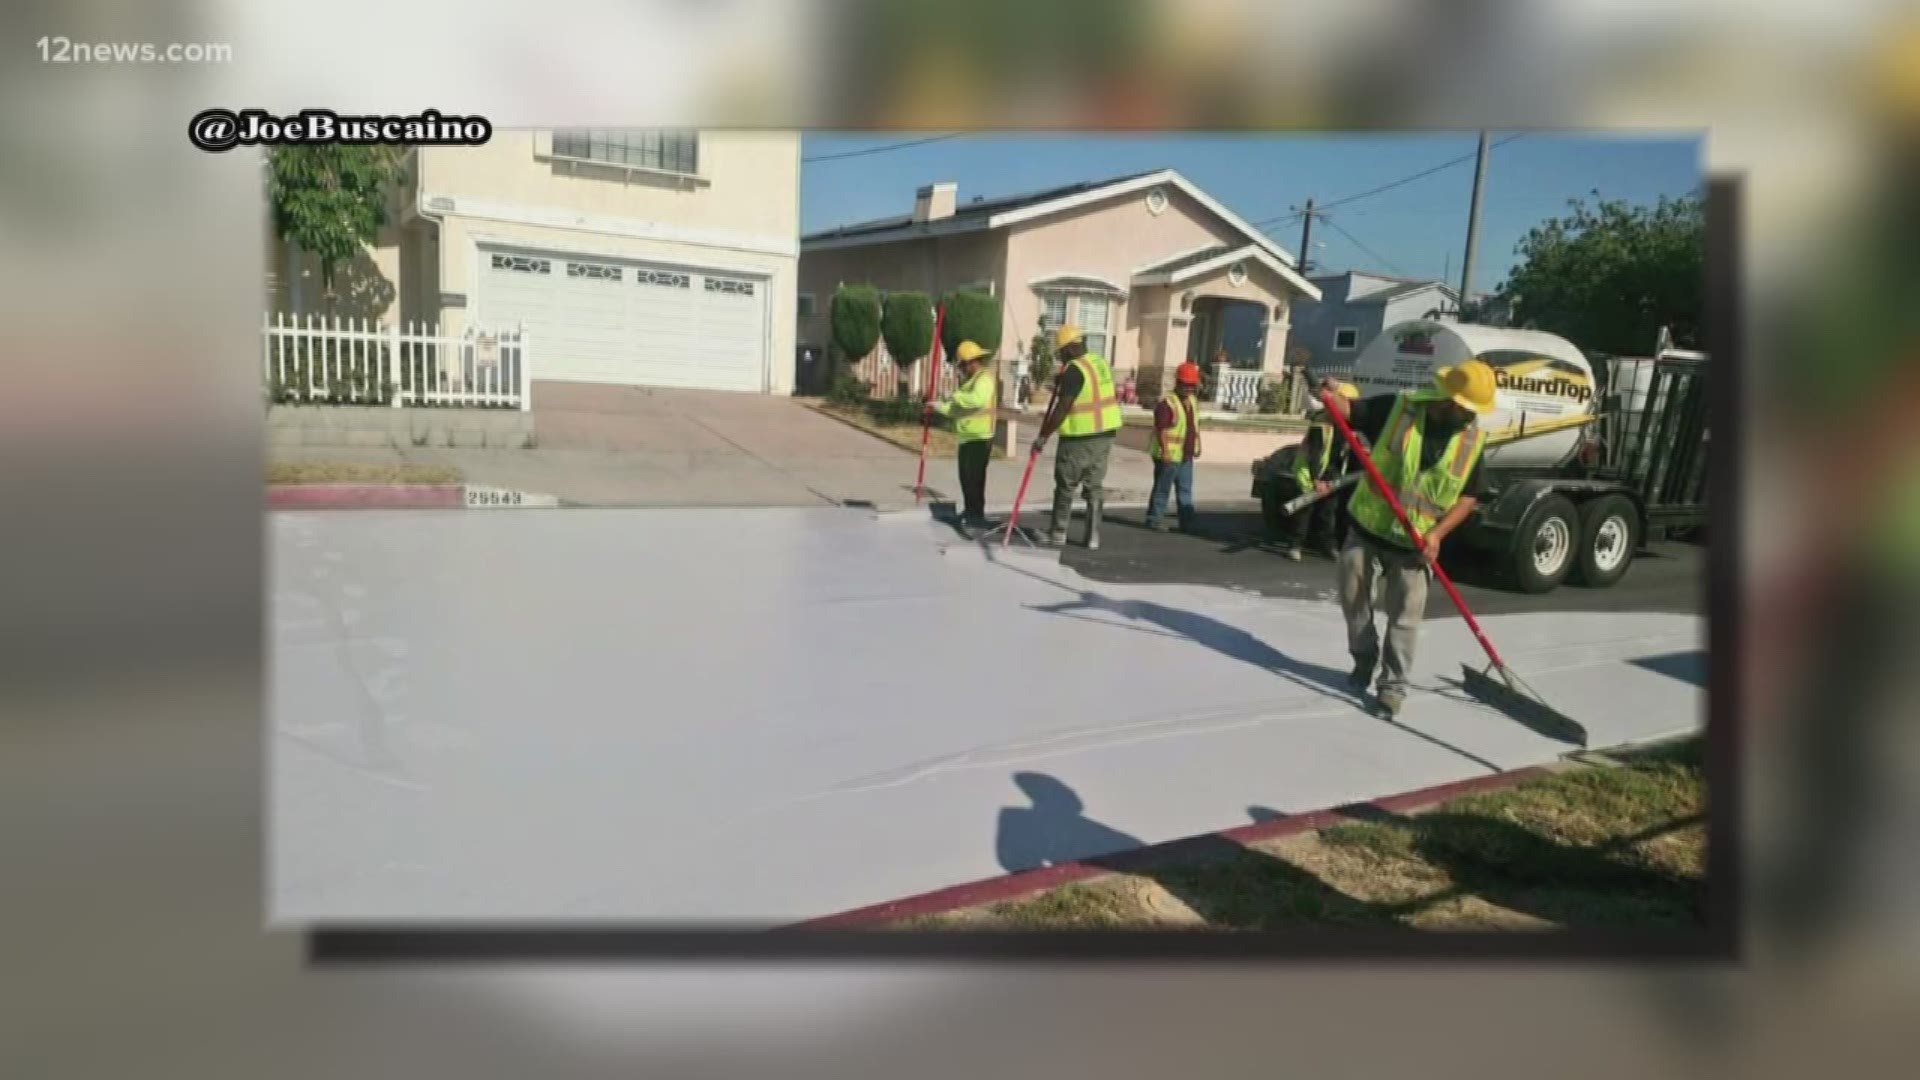 Last summer, L.A. started a pilot program to lighten asphalt streets. An ASU professor says it works, but it's not the only way to beat the heat.